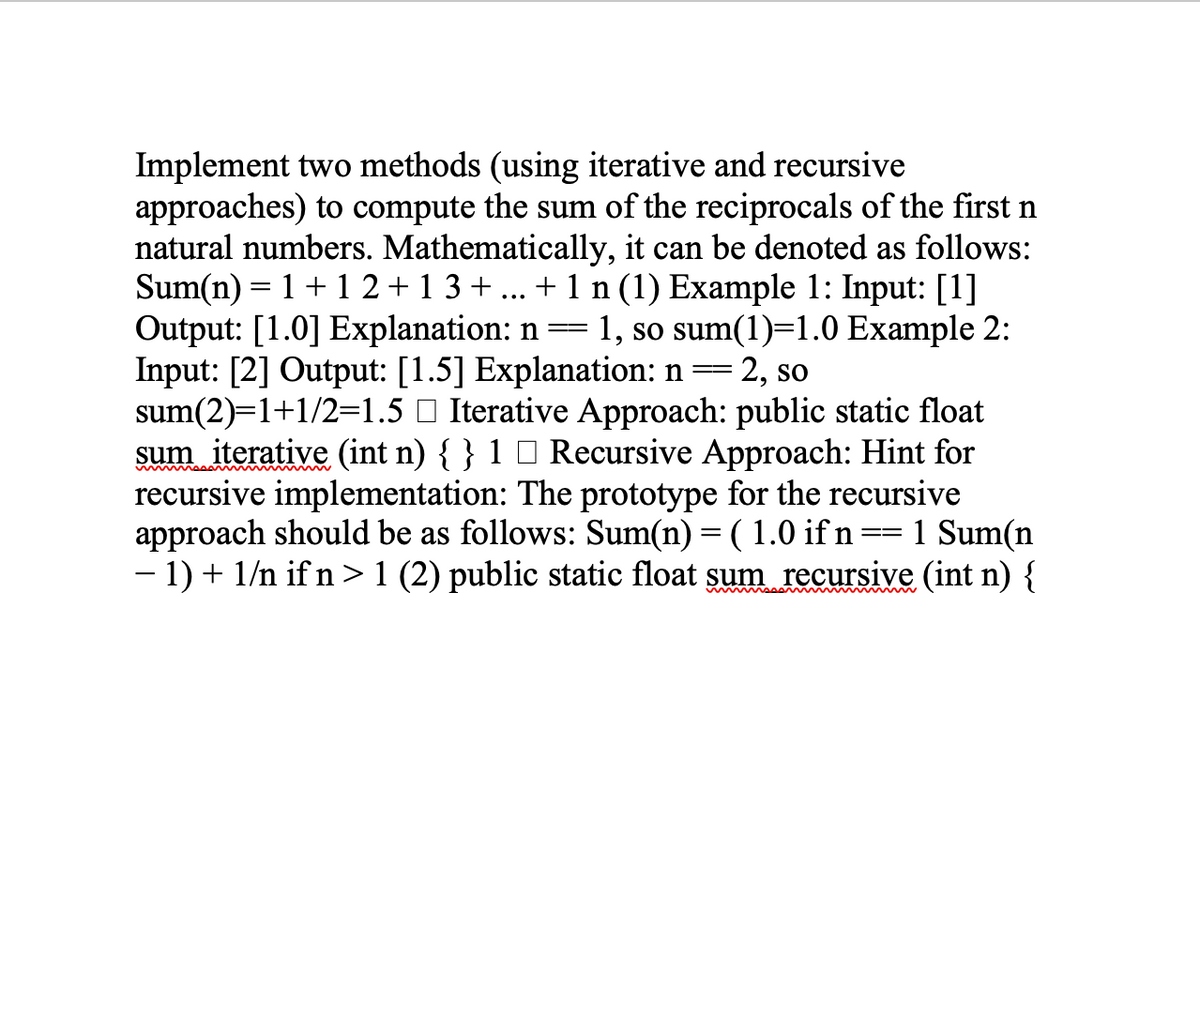 Implement two methods (using iterative and recursive
approaches) to compute the sum of the reciprocals of the first n
natural numbers. Mathematically, it can be denoted as follows:
Sum(n) = 1 + 1 2+1 3+ ... + 1 n (1) Example 1: Input: [1]
Output: [1.0] Explanation: n= 1, so sum(1)=1.0 Example 2:
Input: [2] Output: [1.5] Explanation: n
sum(2)=1+1/2=1.5 O Iterative Approach: public static float
sum iterative (int n) { } 1 0 Recursive Approach: Hint for
recursive implementation: The prototype for the recursive
approach should be as follows: Sum(n) = ( 1.0 if n== 1 Sum(n
- 1) + 1/n if n >1 (2) public static float sum recursive (int n) {
-
= 2, so
